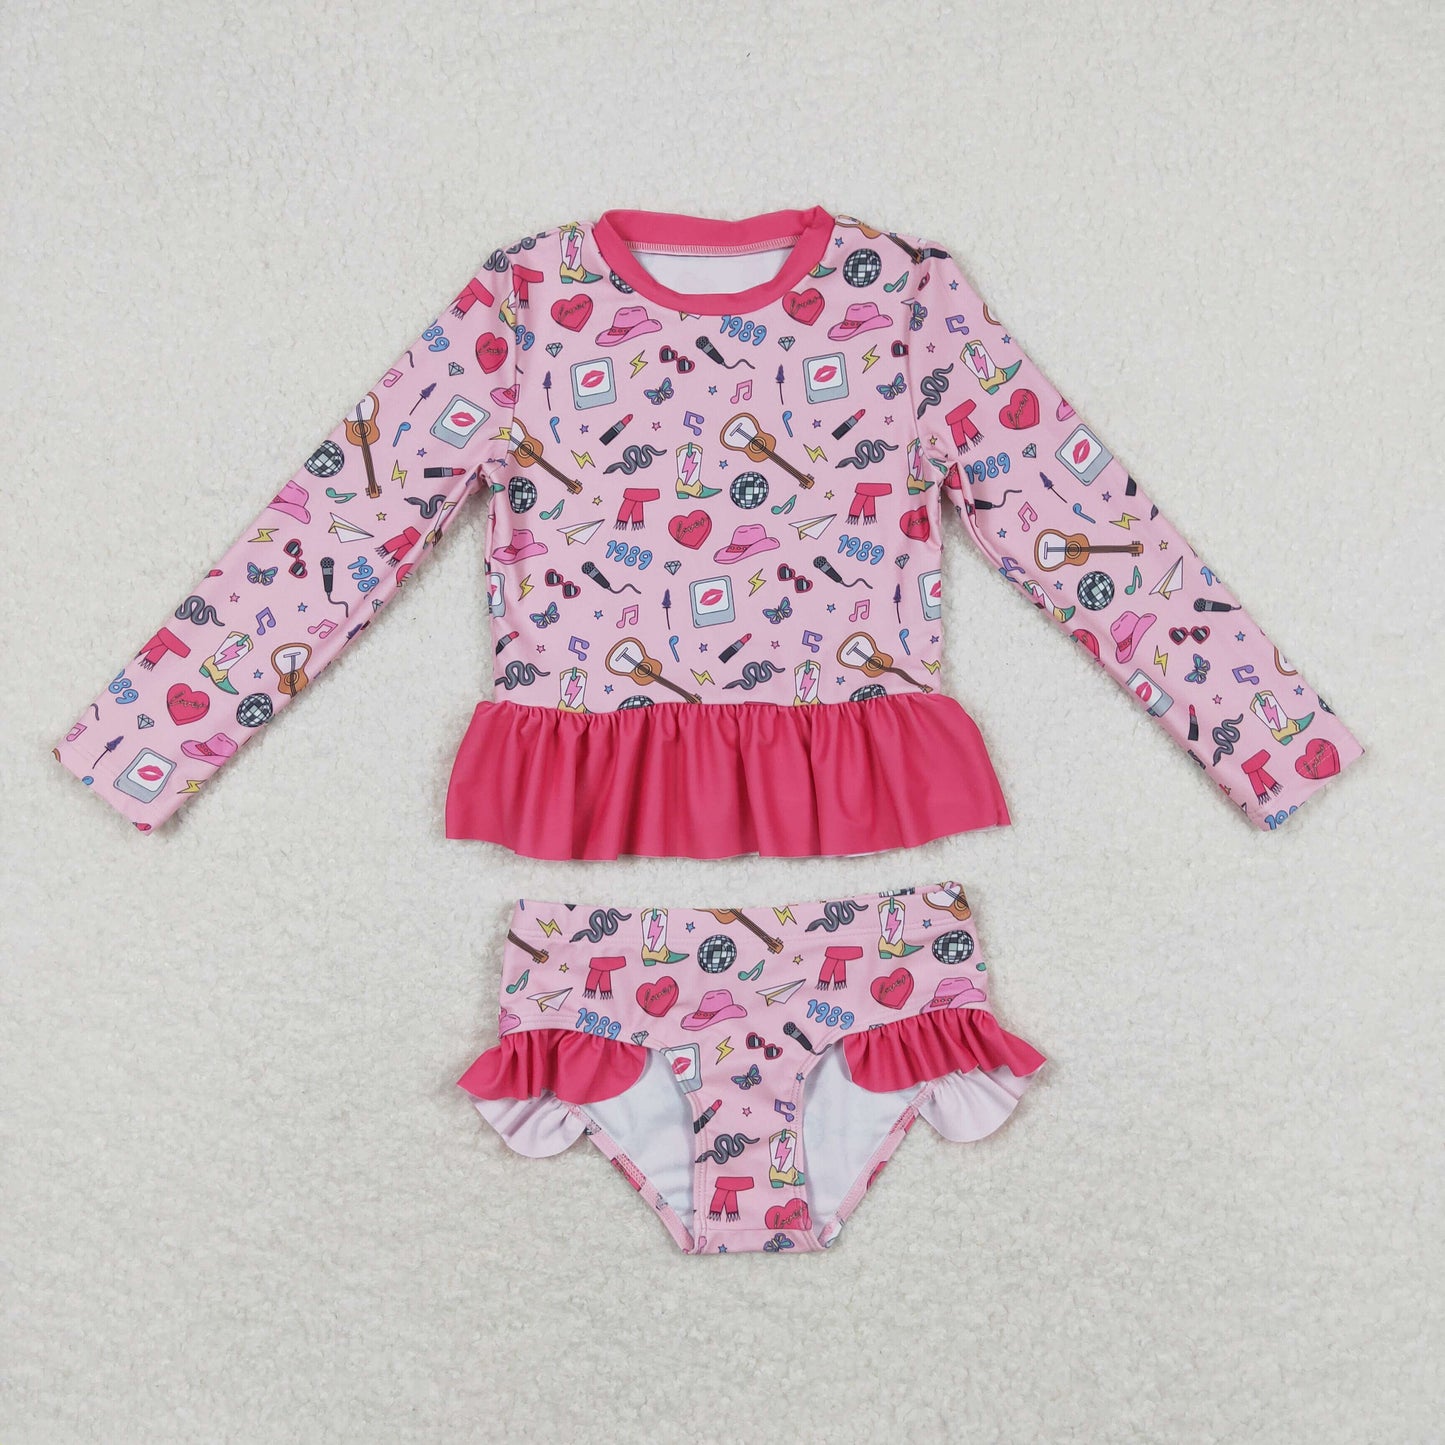 S0293 Summer Baby Girls Pop Singer Long Sleeve Two Pieces Swimsuit  Set